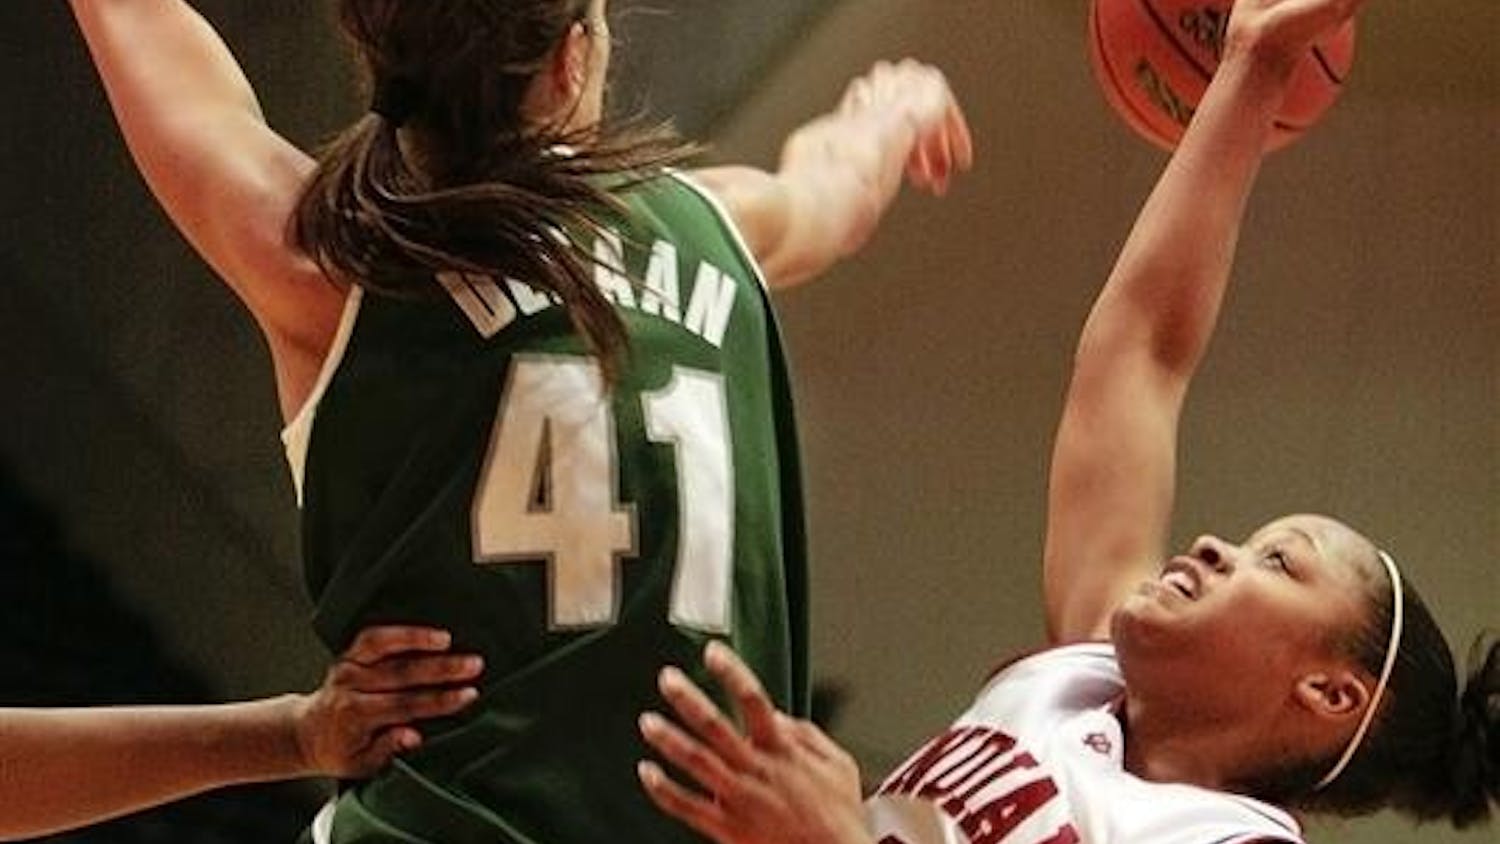 Sophomore guard Andrea McGuirt has her shot rejected by Michigan State's 6-foot-9-inch center Allyssa DeHann during the Hoosiers 71-65 loss to the Spartans February 12 at Assembly Hall.